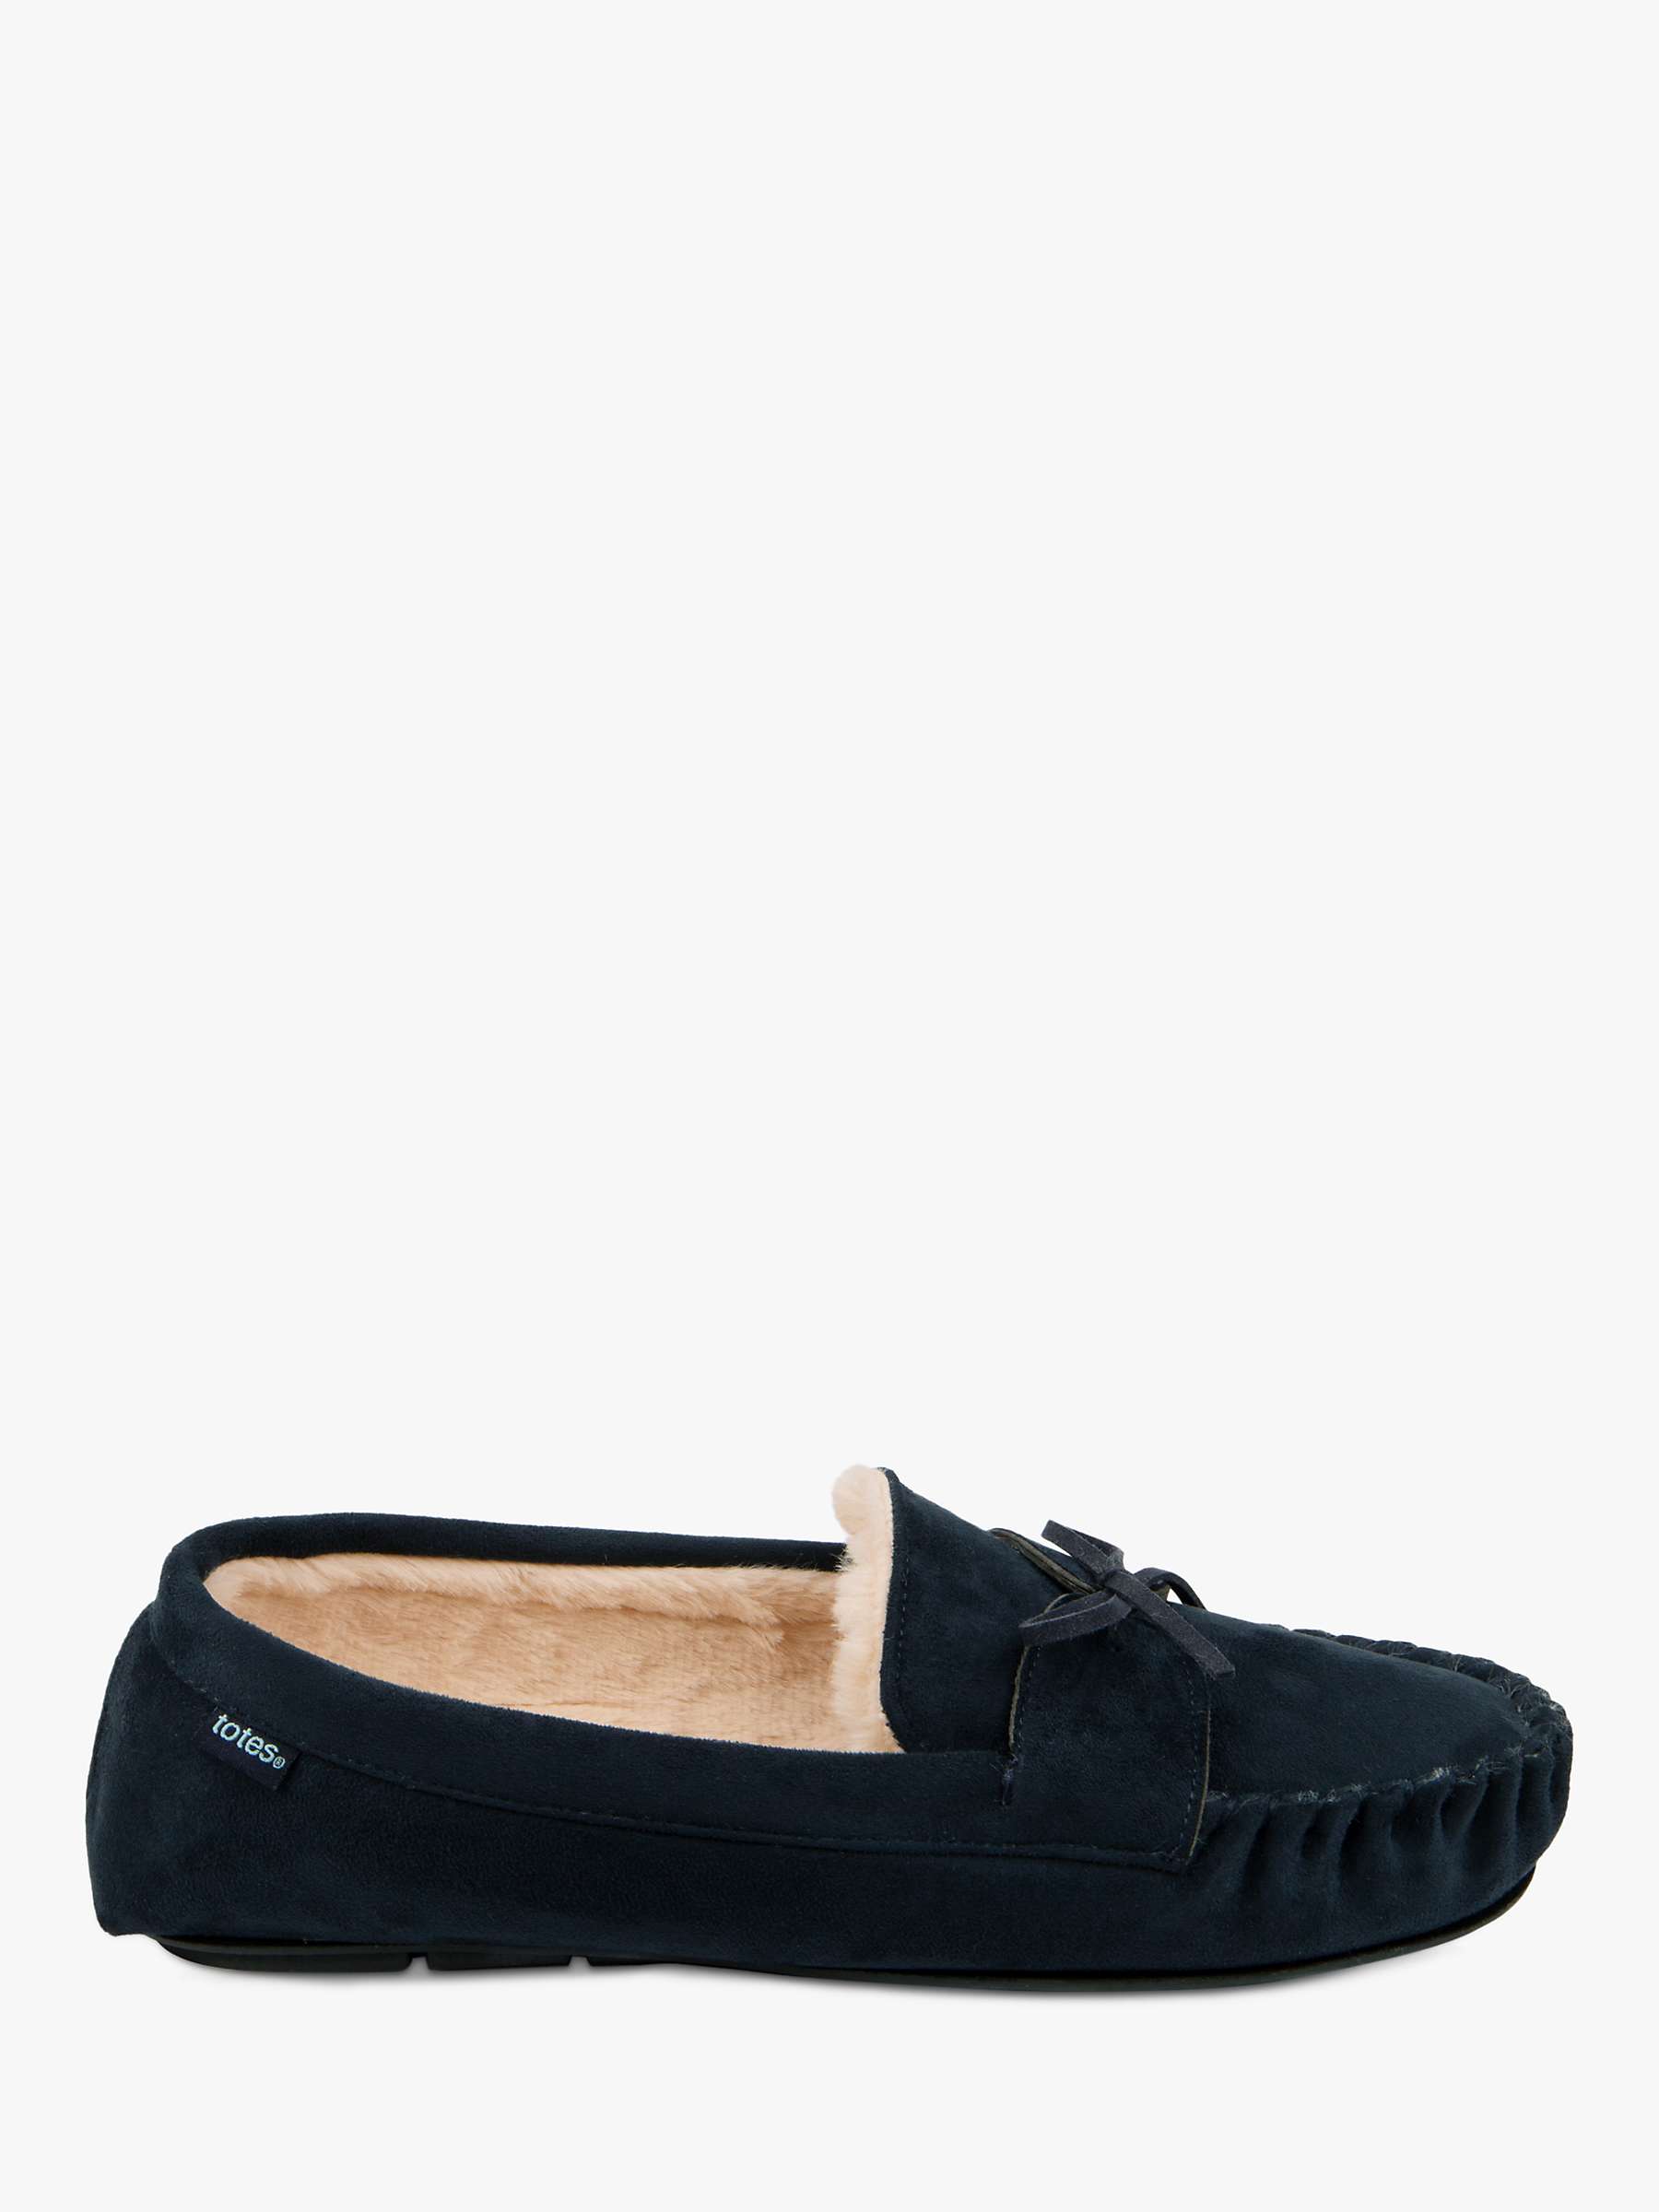 Buy totes Moccasin Style Faux Fur Lining Slippers, Navy Online at johnlewis.com